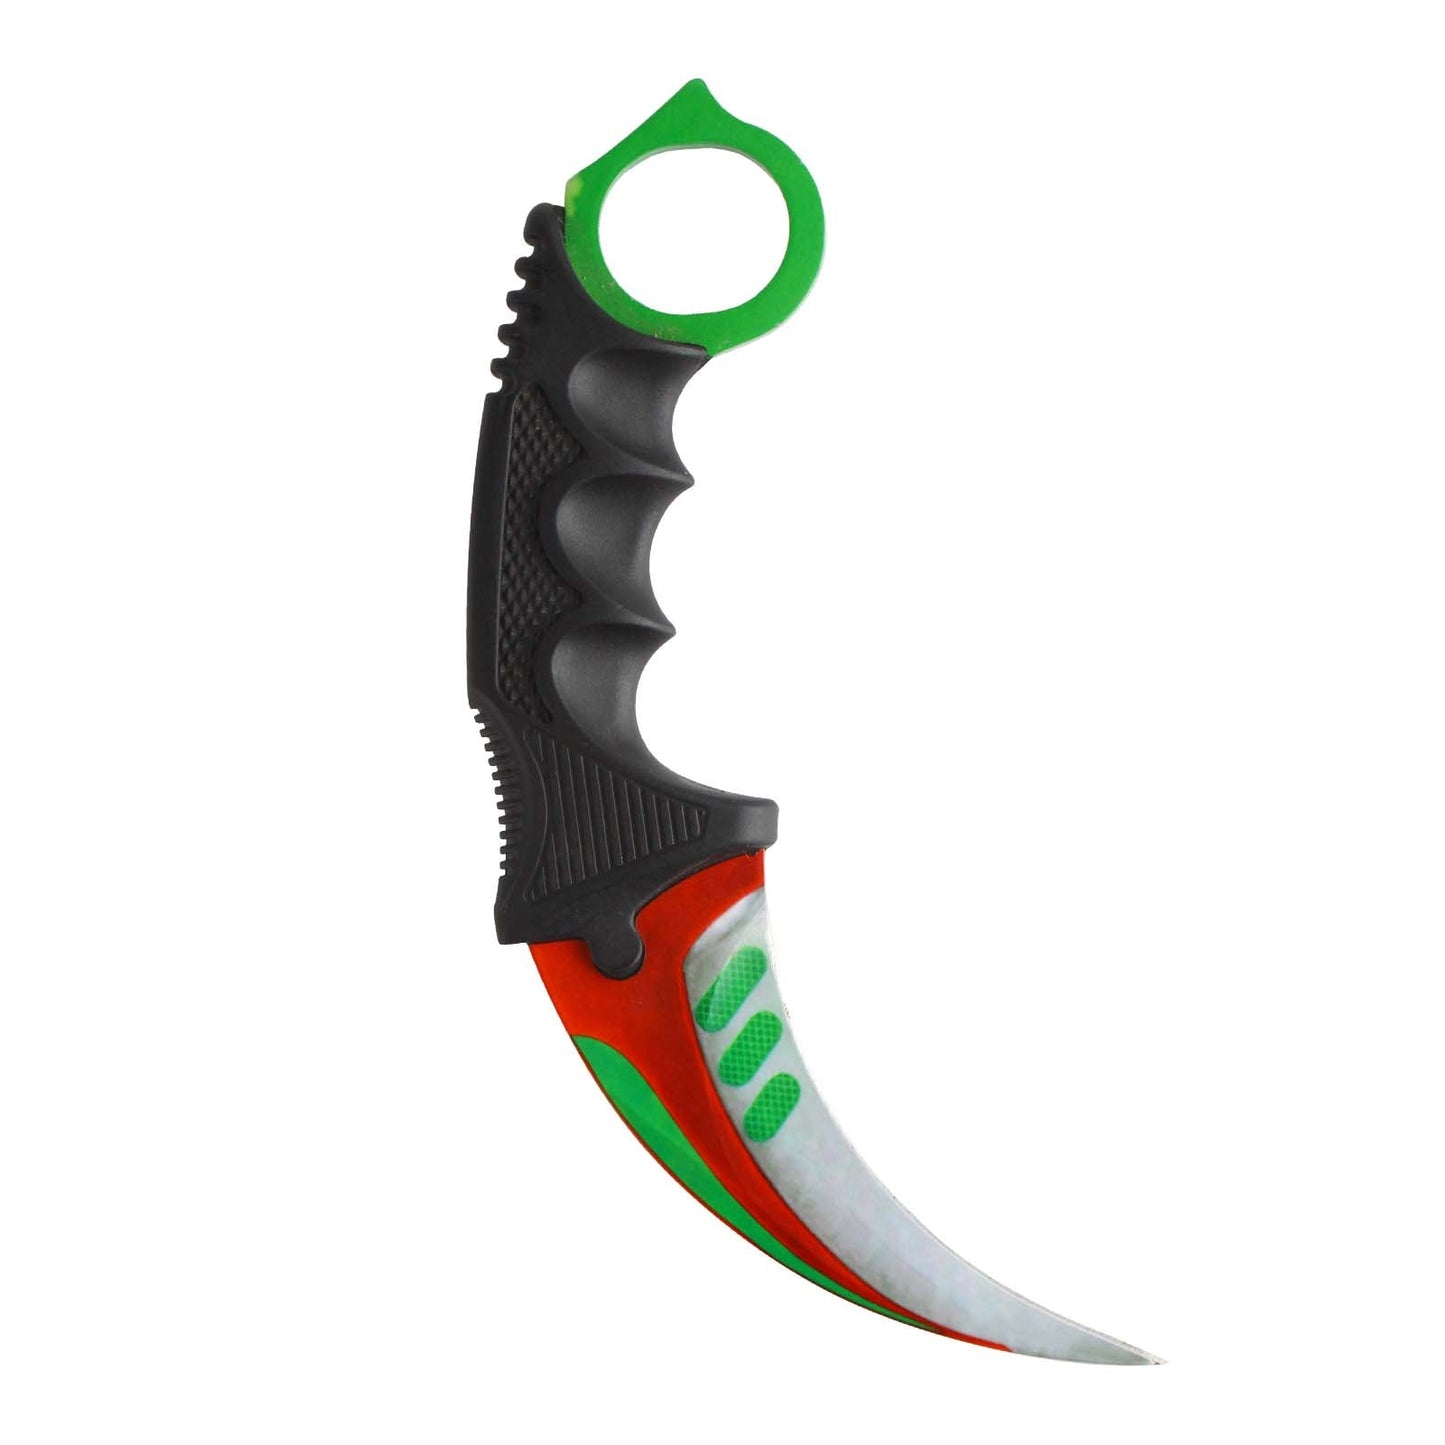 Andux Balisong Karambit Knife CS/ZD-01 Green+Red (ONLY Available in the United States)